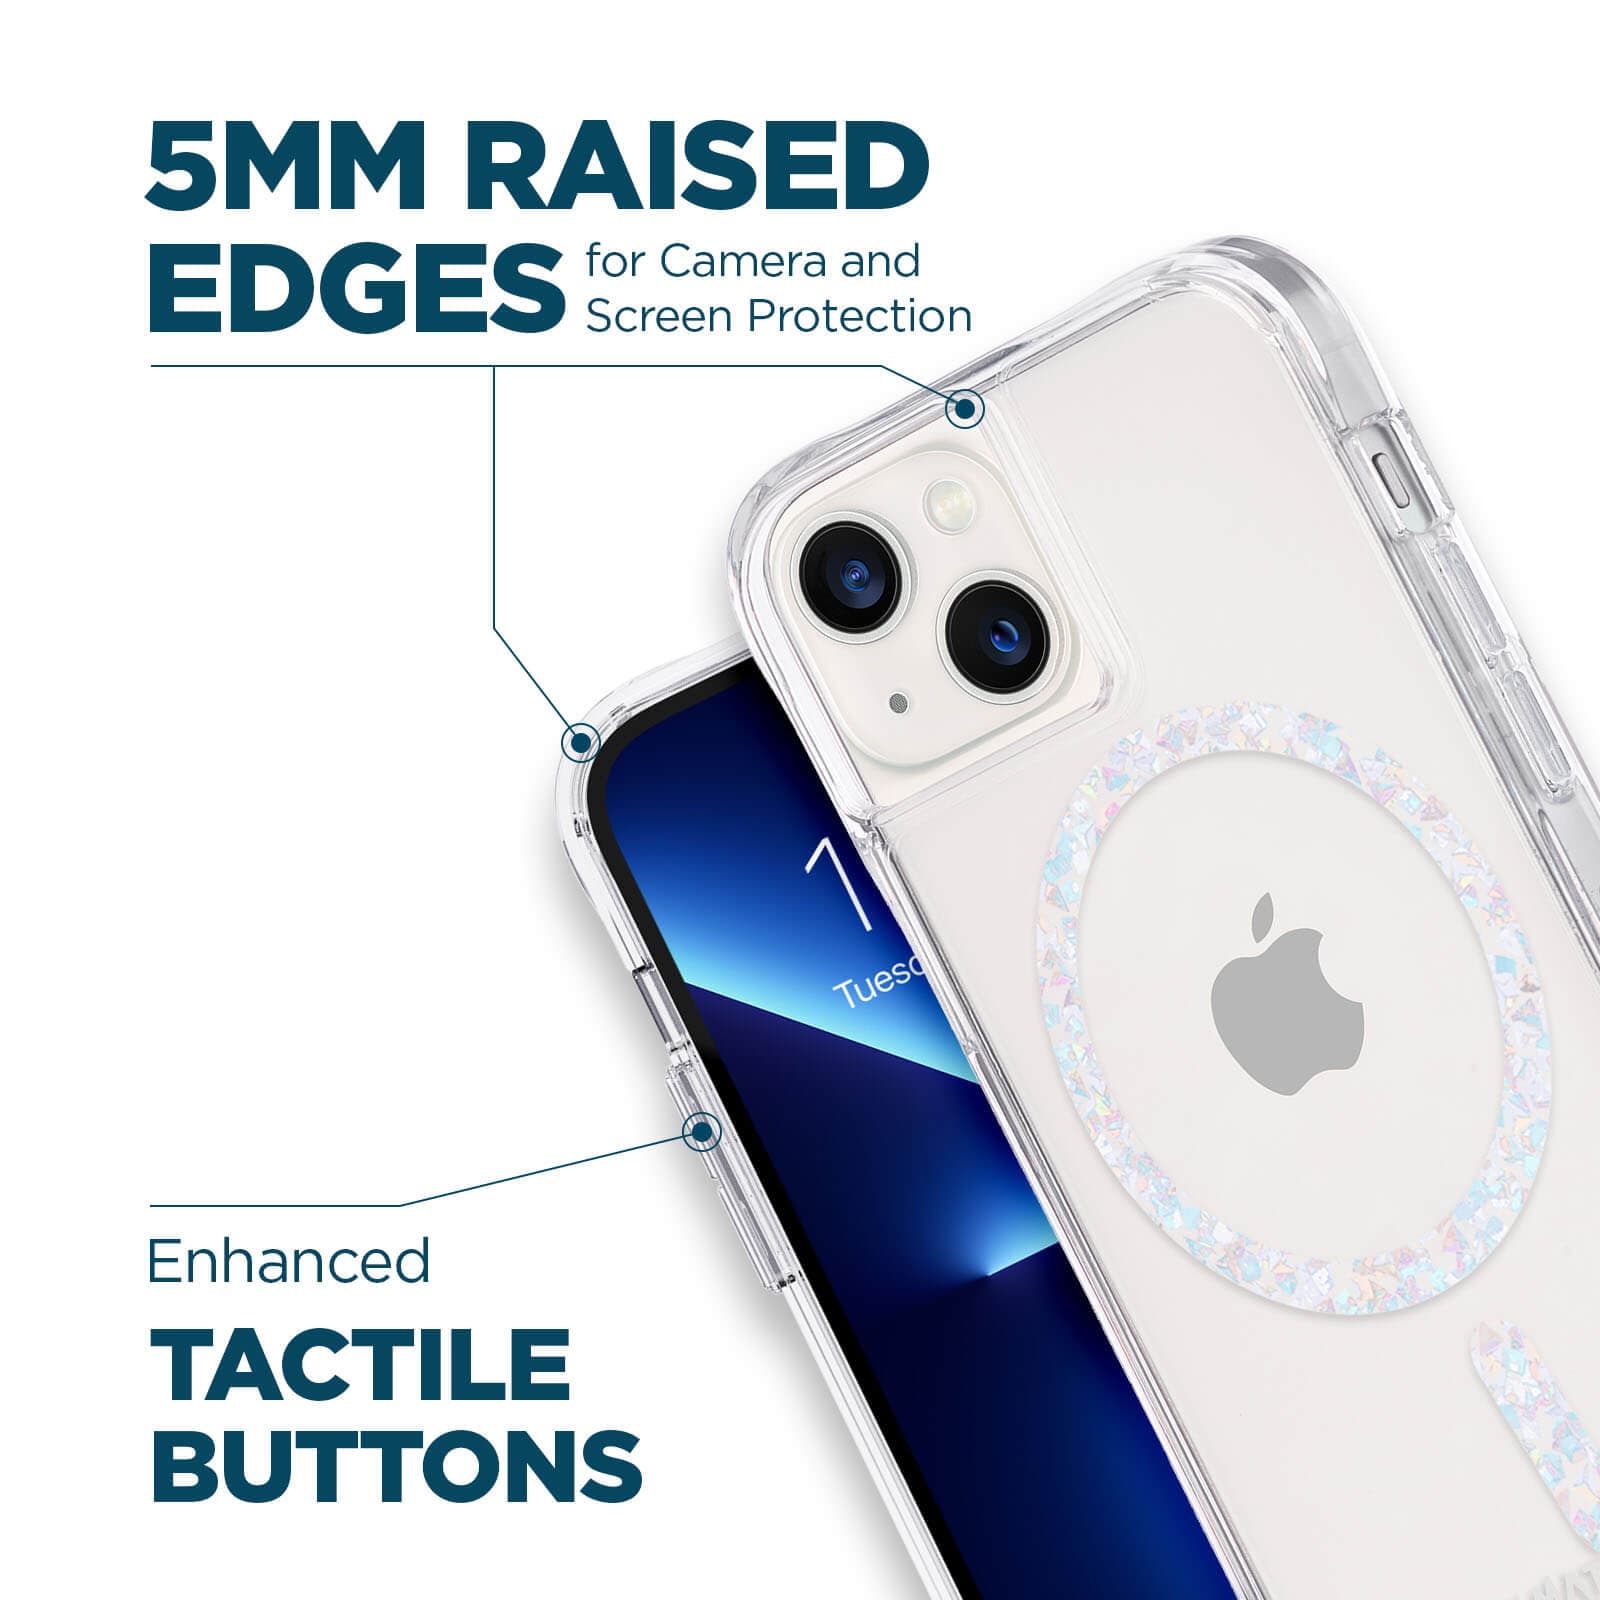 5mm raised edges for camera and protection. Enhanced Tactile buttons color::Twinkle Diamond